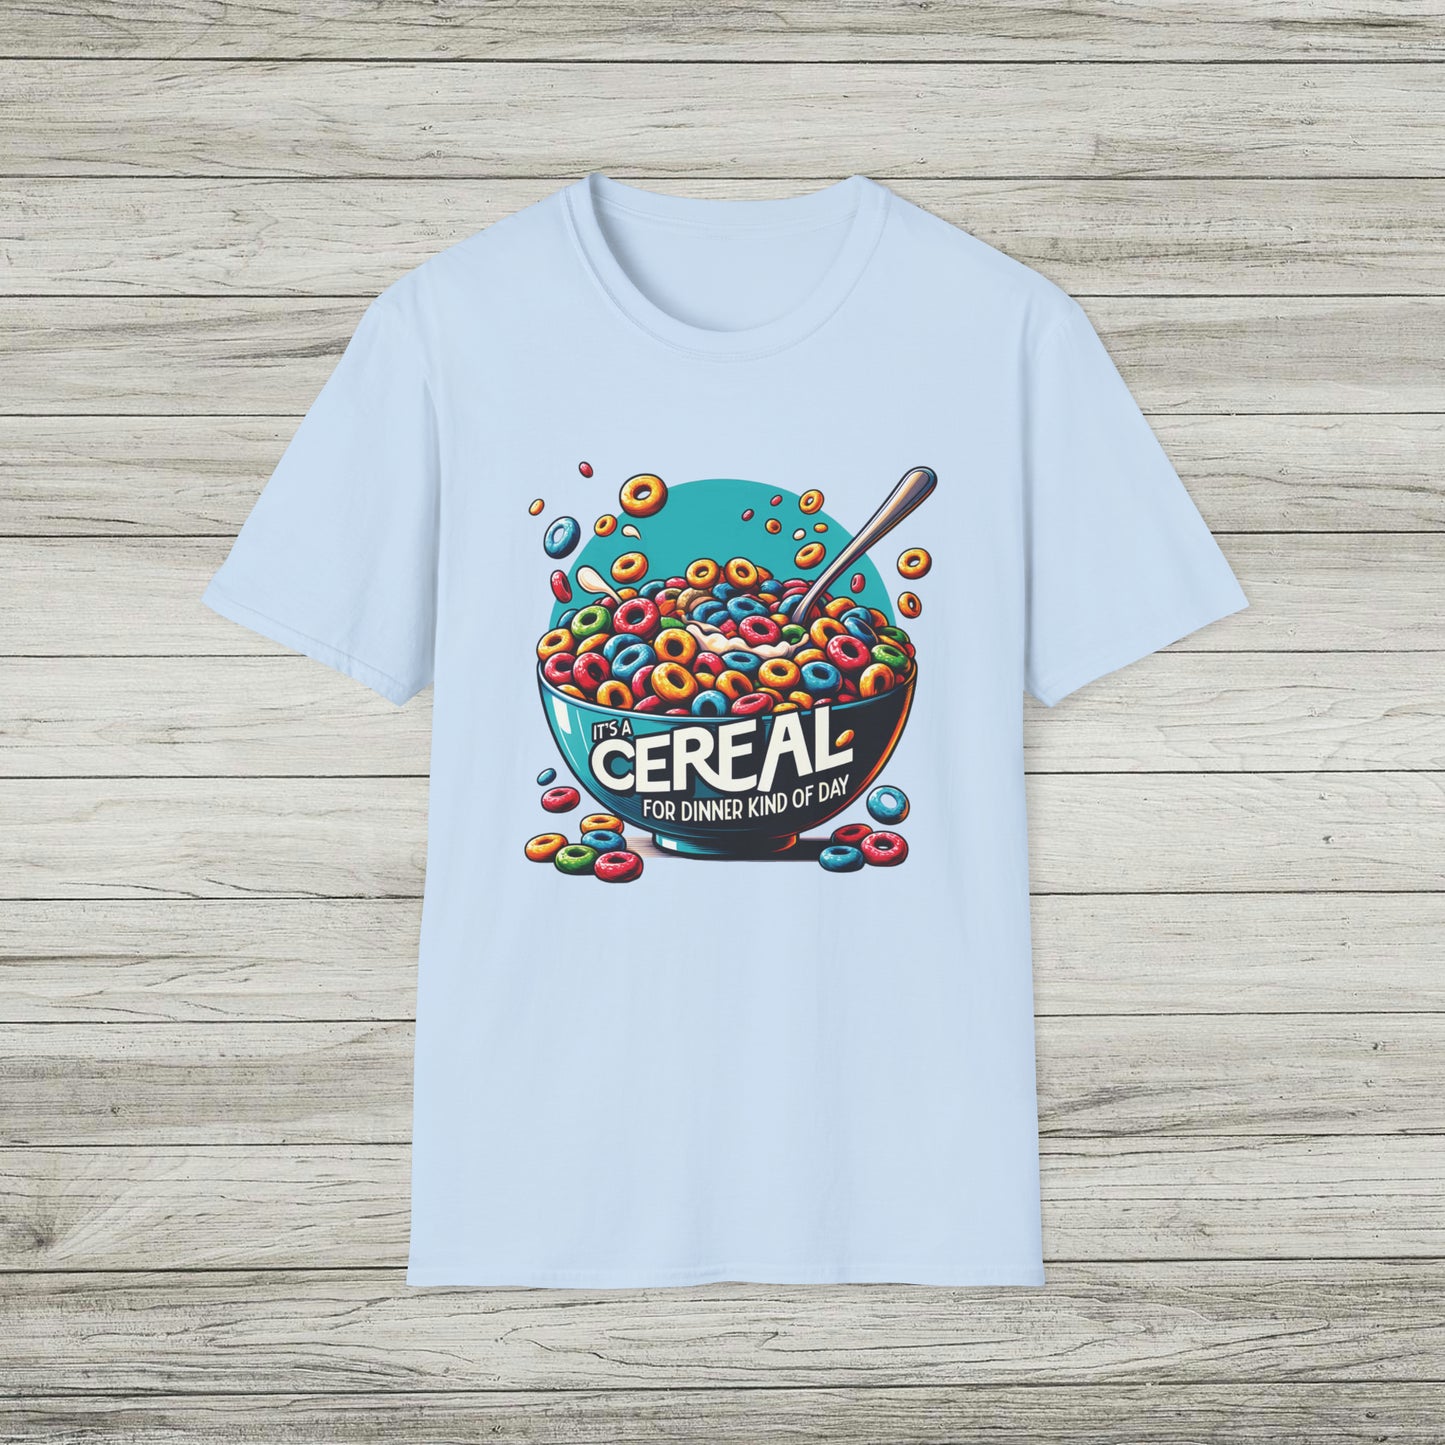 Cereal for Dinner Softstyle T-Shirt, Girl Dinner TShirt, Funny Bad Day Tee